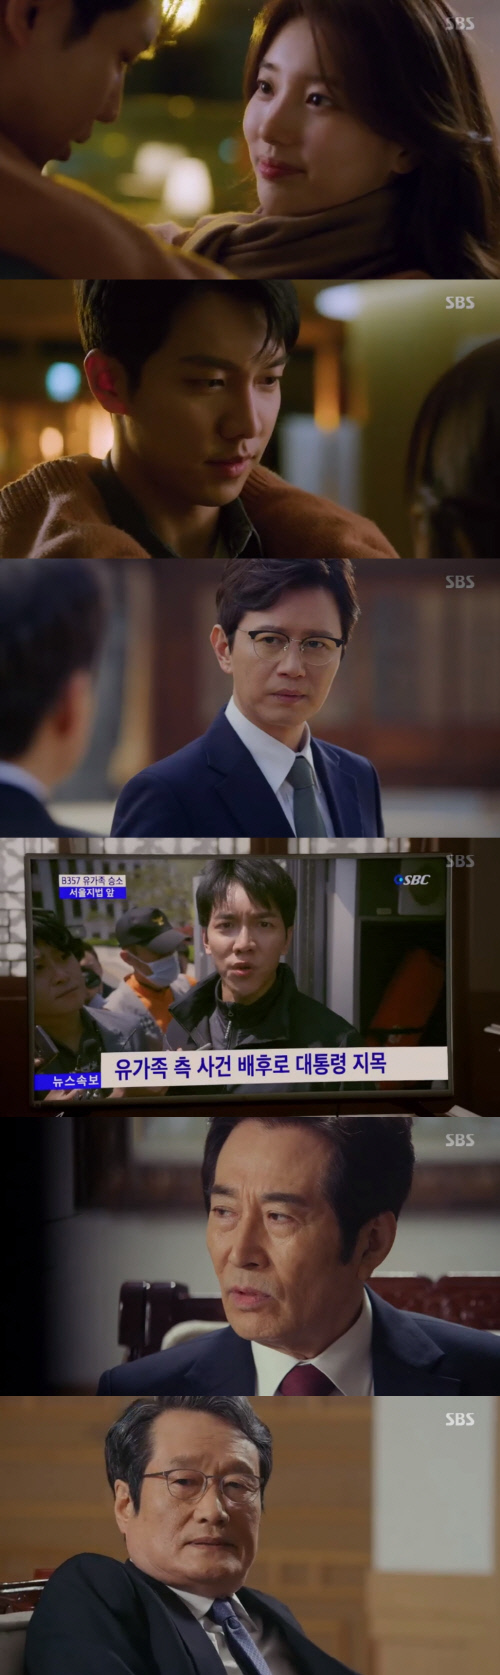 In the SBS gilt drama Vagabond, which aired on the 2nd, Cha Dal-gun (Lee Seung-gi) was shown asking Jungkook (Yun-shik Baek) for responsibility.Kim Woo-ki (played by Jang Hyuk-jin) testified at the trial for damages in the crash of the B357 plane on the Minhang passenger plane that the person who bought the accident was John & Mark, vice president of the company, and there is also evidence that he bought it.A file was released and Judge Seok Soo-il (Yoon Da-hoon) ruled that Dynamic should pay 11.5 billion won in alimony to the bereaved family.Also, John & Mark filed a criminal complaint against him for terror.Edward Park (Lee Kyung-young), a lawyer for Dynamics, bowed his head, saying, I am not going to appeal, but I will be responsible for negligence because I hurt the bereaved family anyway.After the trial, Gohari collapsed with a gunshot wound and was soon taken to hospital.Cha Dal-gun pointed to a camera shooting a confession as he pointed to President Jungkook as the background of the error. Cha Dal-geon said, Please announce the public statement and forgive the people.If you are president, you have to have that kind of conscience, Furious said.The operation was successfully completed and Chadalgan was carefully nursed for the recovery of the confession, and the strange atmosphere was formed again between the two.Jessica Lee (Moon Jung-hee) was arrested on suspicion of illegal lobbying and was unfortunately imprisoned in the same room as Oh Sang-mi (Kang Kyung-hun).The two mens conflict, which had been growling, ended with Oh Sang-mi being released from prison on charges of not being detained. Jessica Lee began to investigate him after he was suspicious of Oh Sang-mi.At the end of the broadcast, Chadalgan received a video of someone inside the plane just before the error, and found the face of the criminal, and received a questionable phone call and Furious.Lee Seung-gi publicly informed President Yun-shik Baek behind the terror, but Yun-shik Baek was not involved in it and cleverly managed to get through the situation.As a result, Lee Seung-gi did not get the picture he wanted, but it was another moment of justice.It was an development that raised expectations that Lee Seung-gis courage would be able to set the ball to reveal the truth and the back of the questioning phone in the future.Photos  SBS